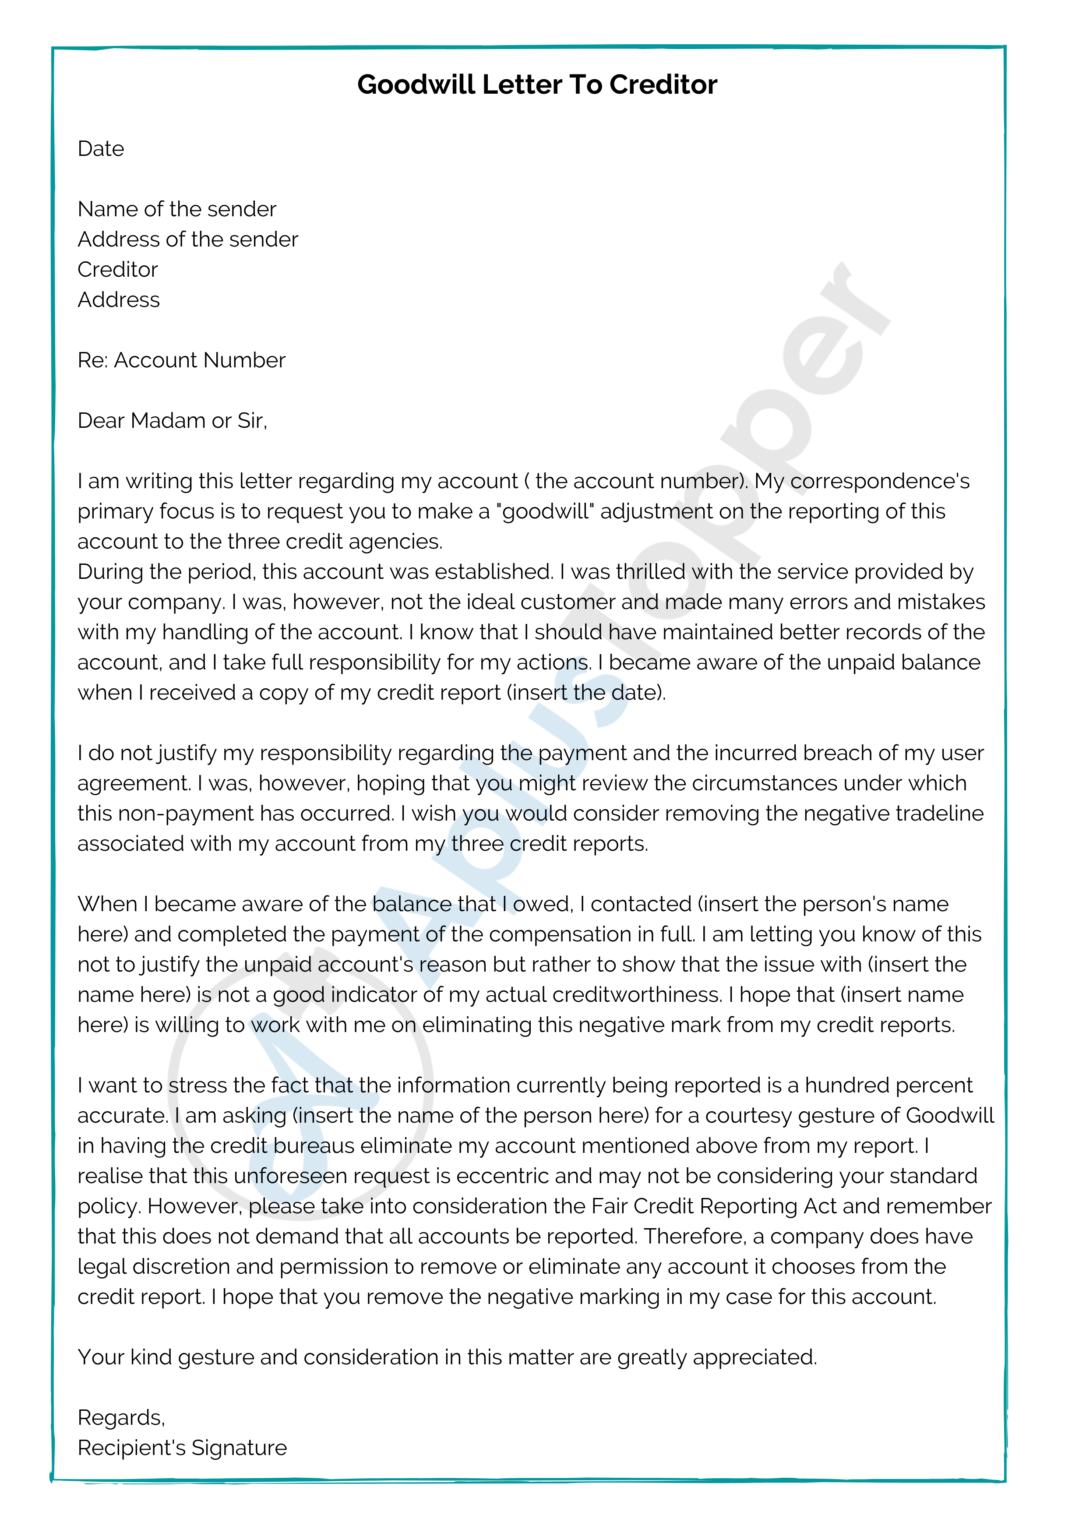 Sample Goodwill Letters Format, Examples and How To Write? A Plus